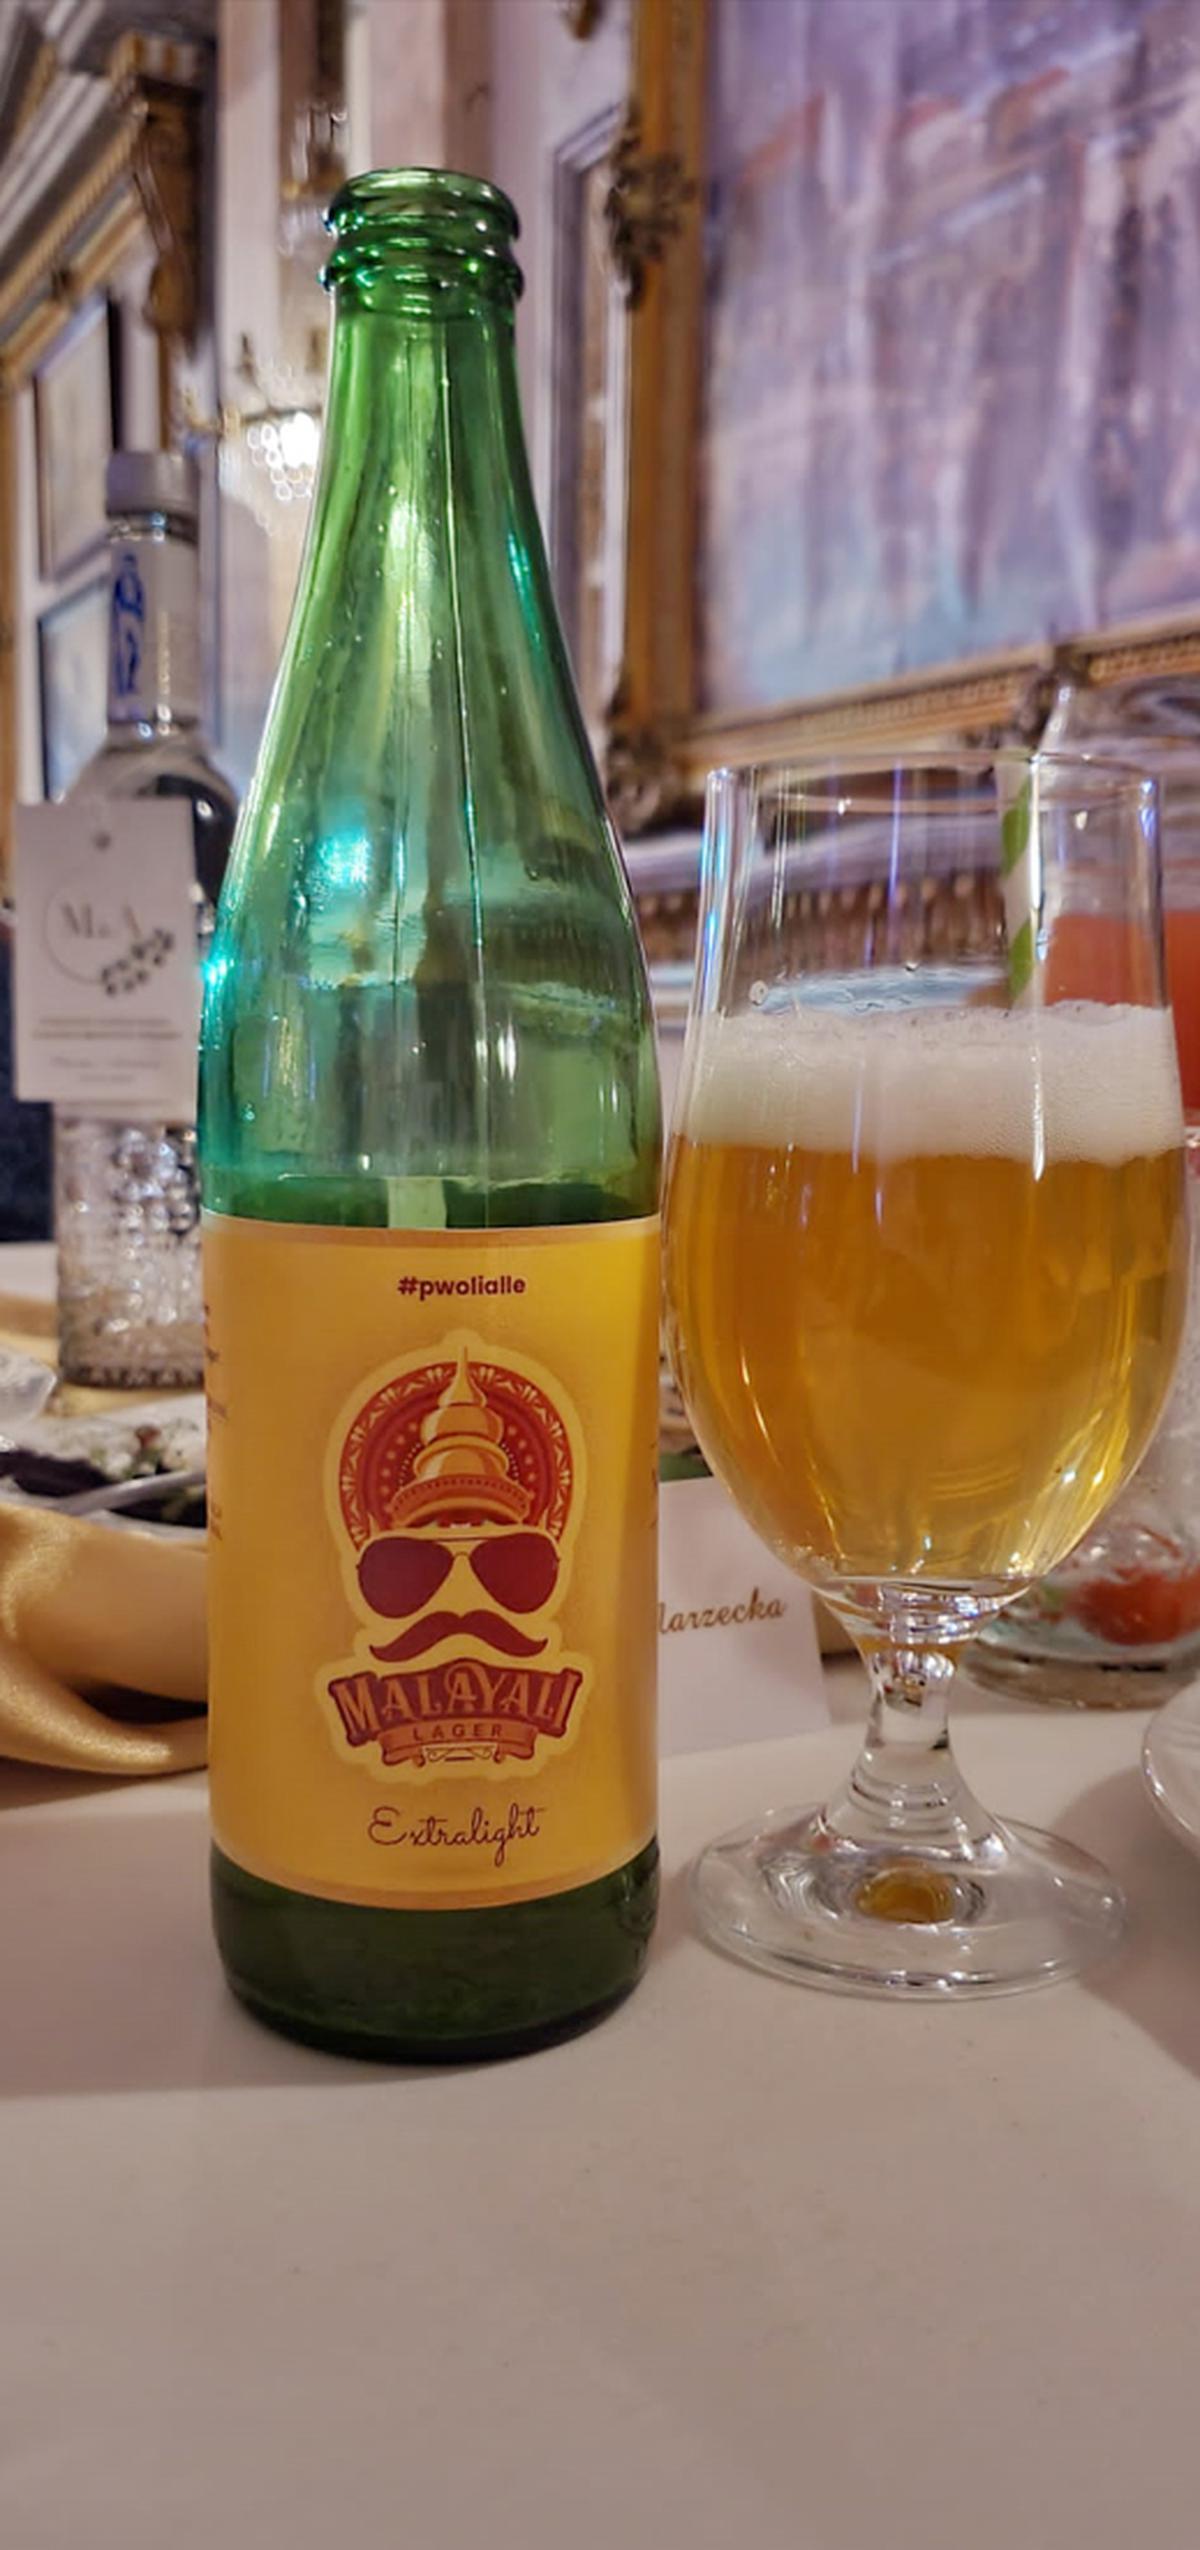 Malayali, the beer that was brewed in Poland 